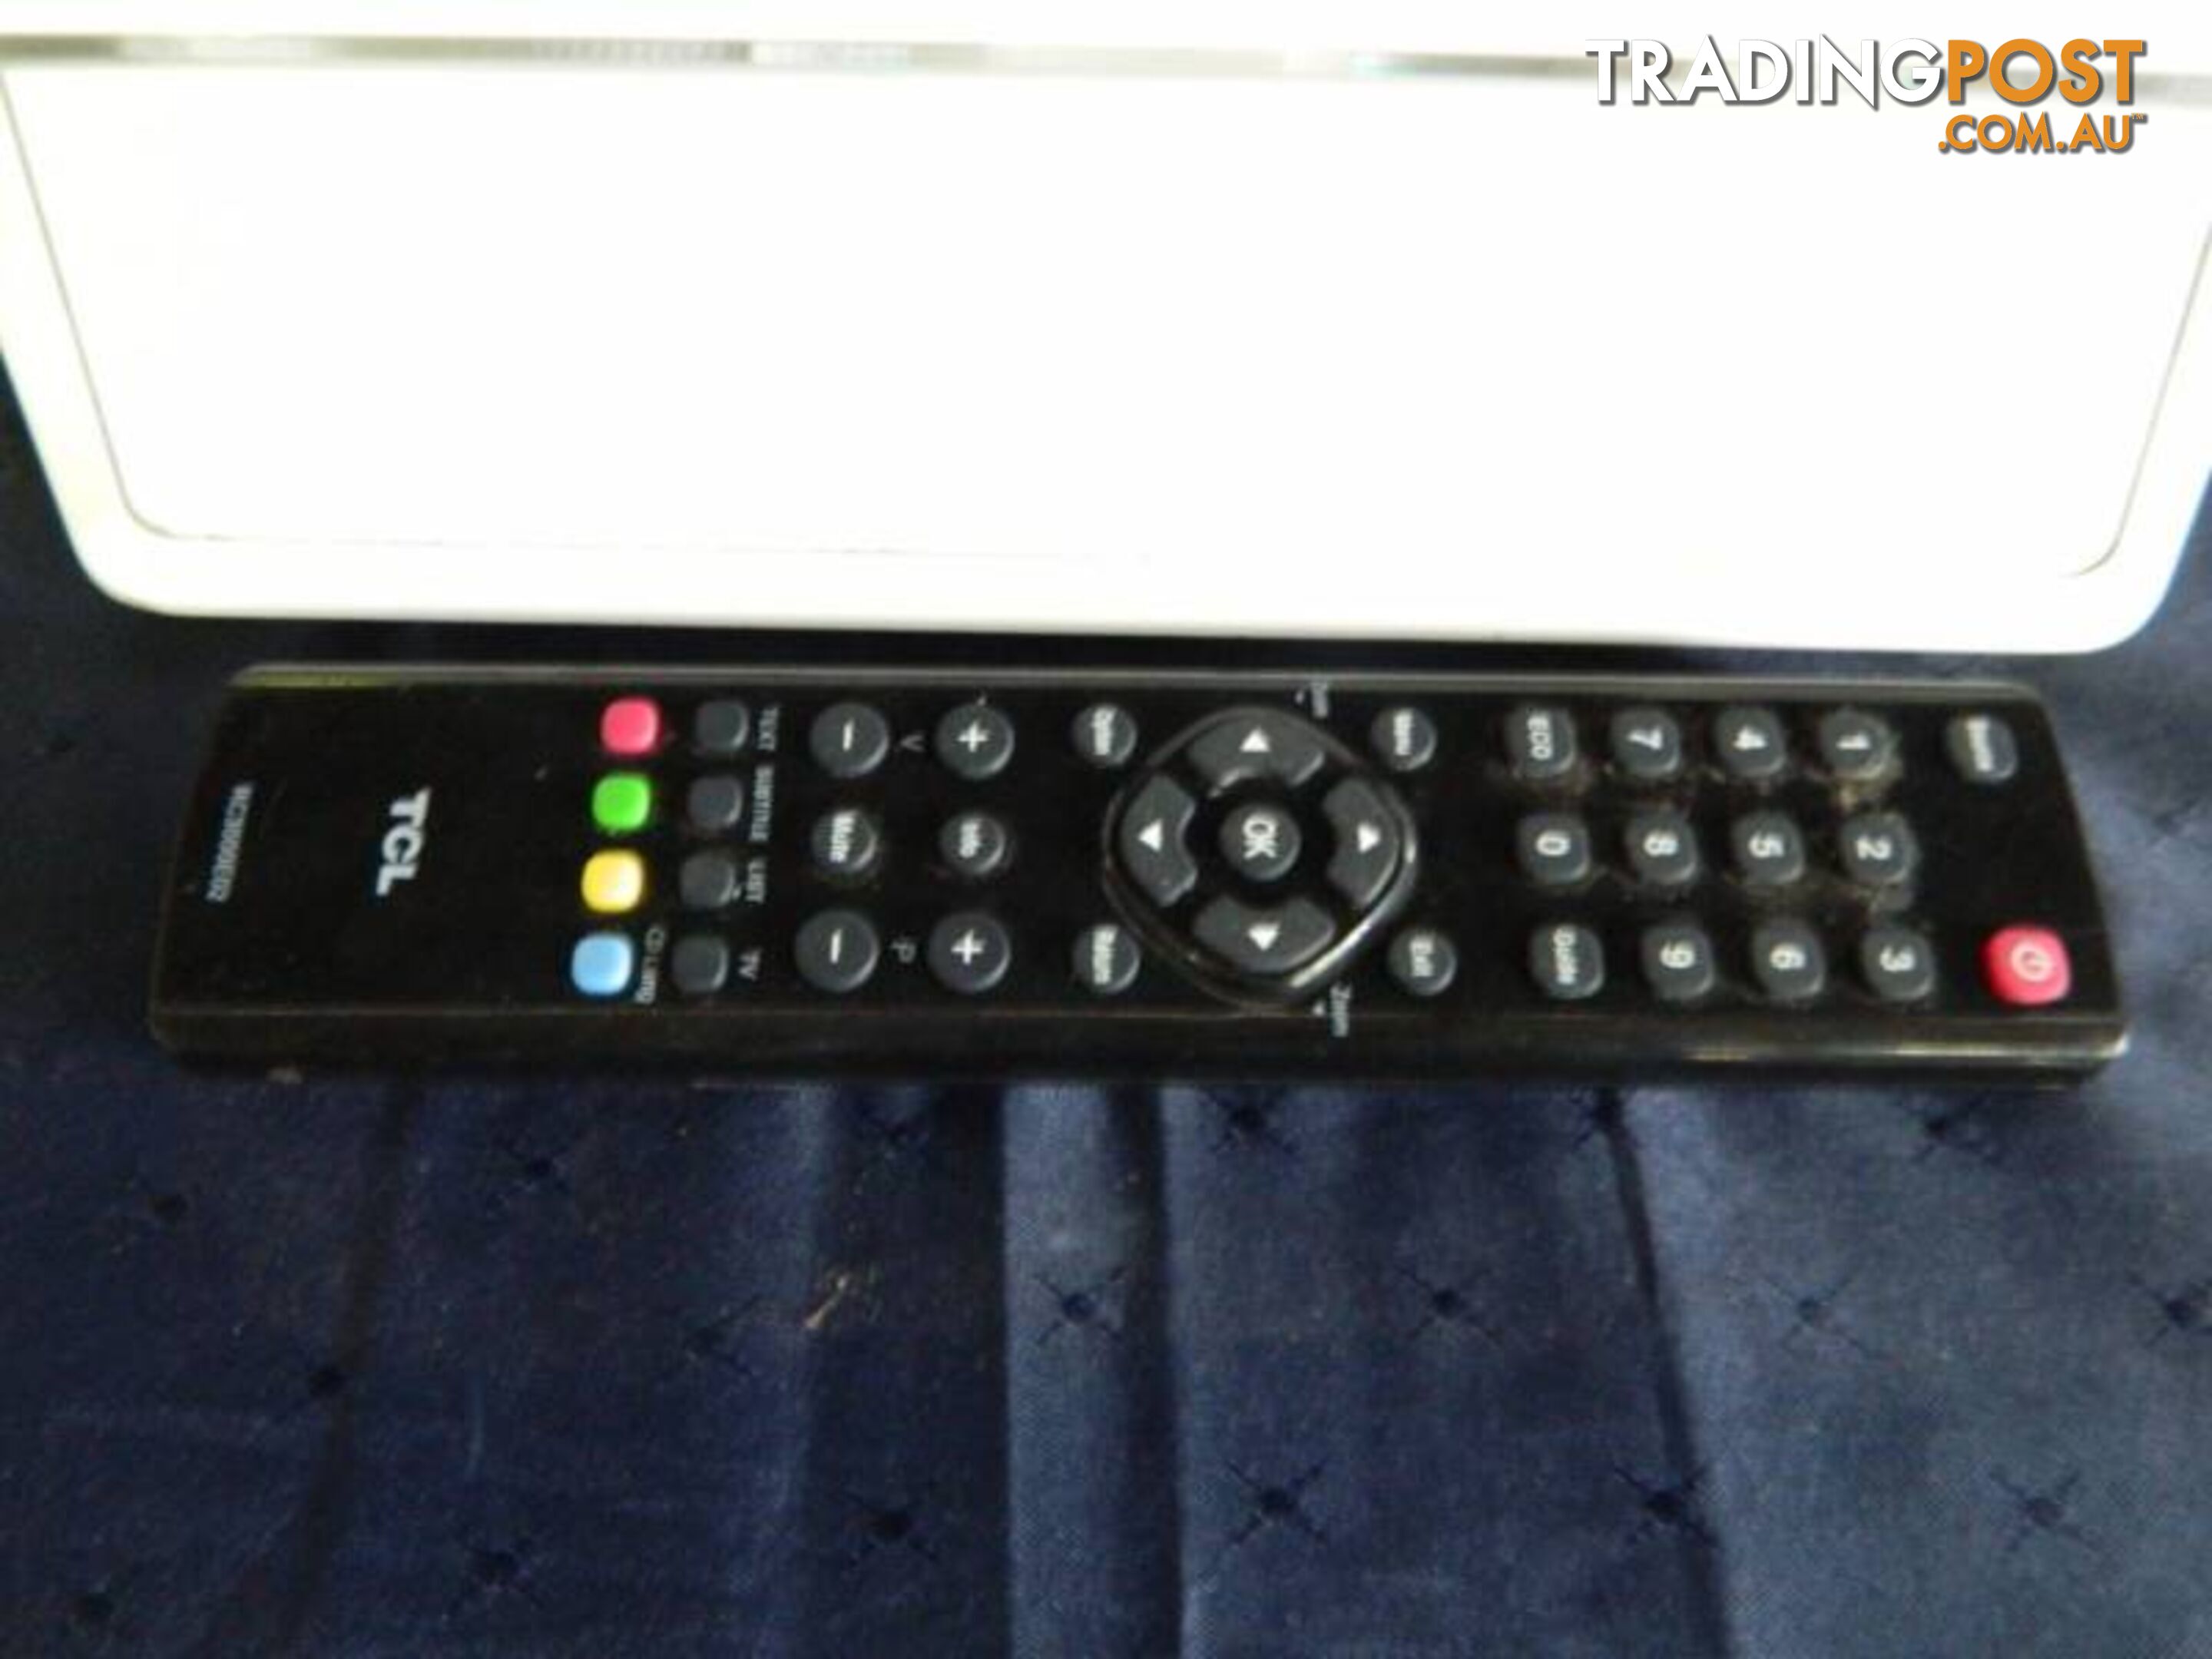 TCL 26" LED TV with Remote - Model: L26E4100W